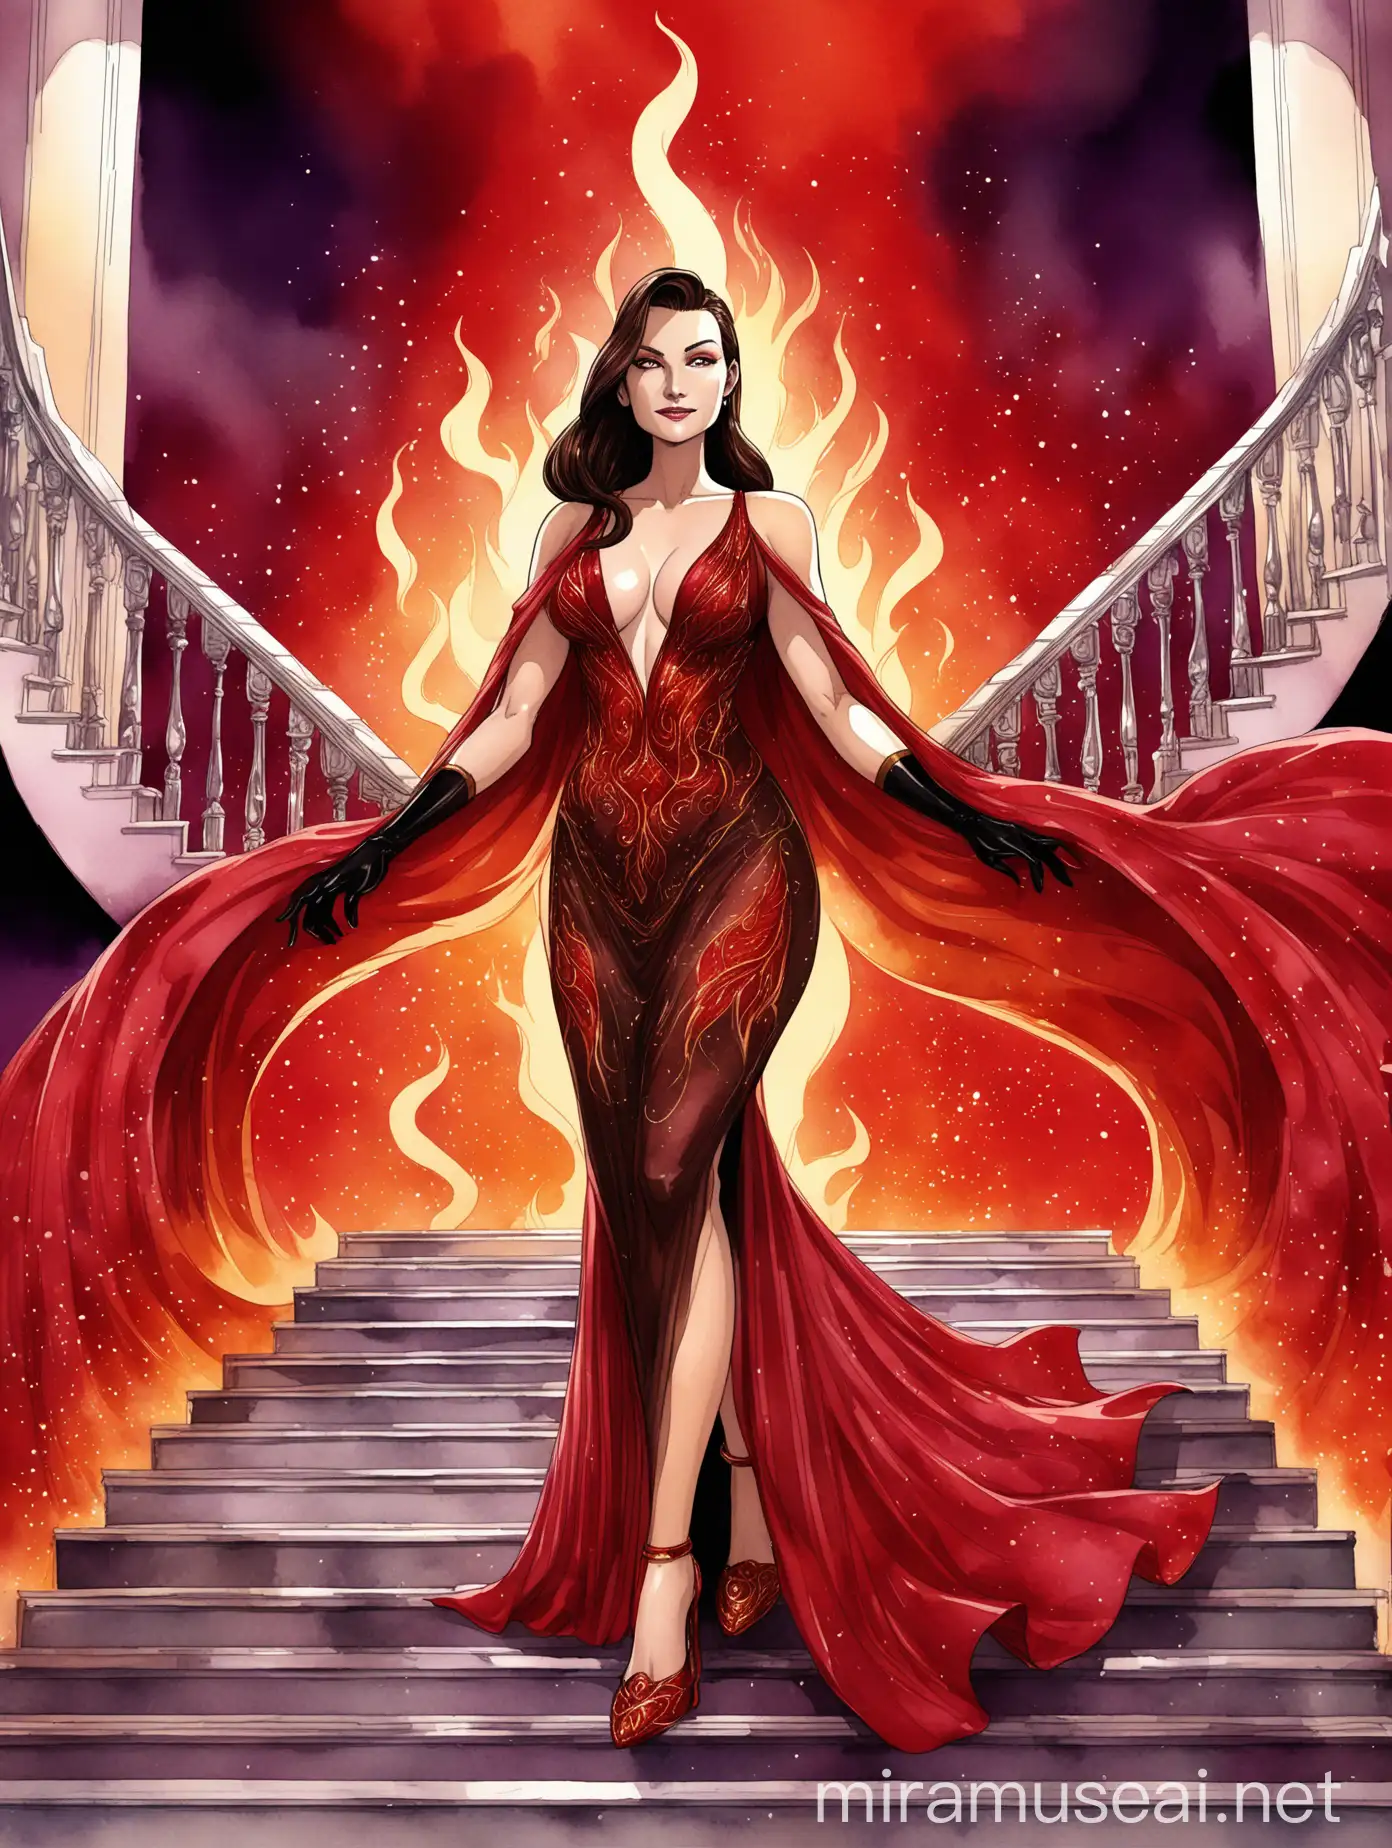 Enigmatic Femme Fatale Stunning Woman in Flame Motif Gown Descending Sparkling Staircase at Sunset